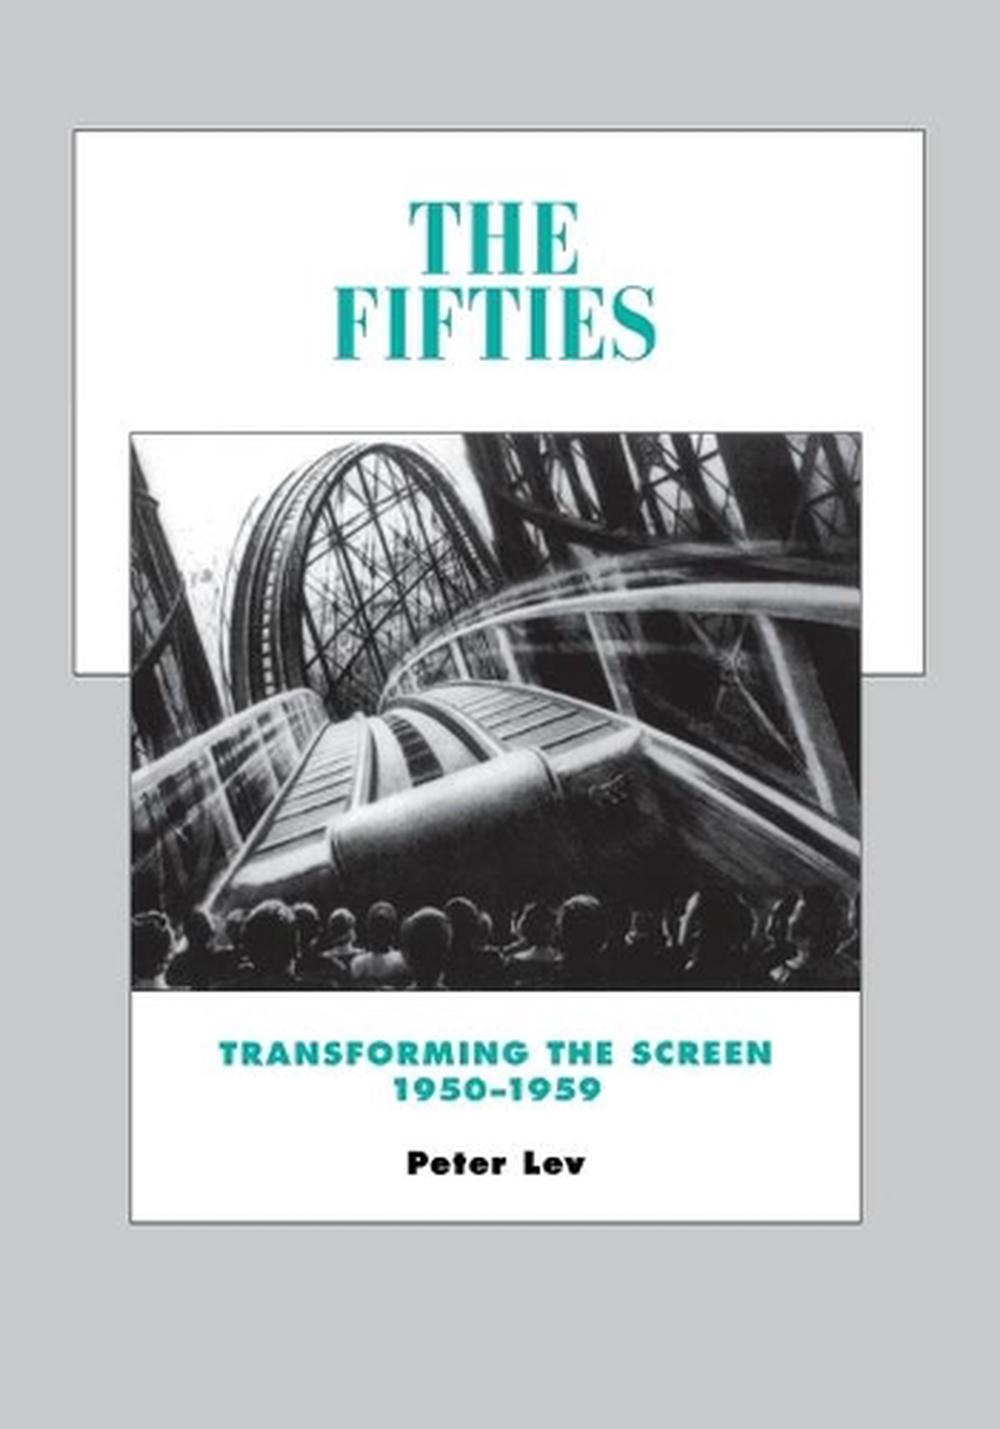 The Fifties Transforming the Screen, 19501959 by Peter Lev (English